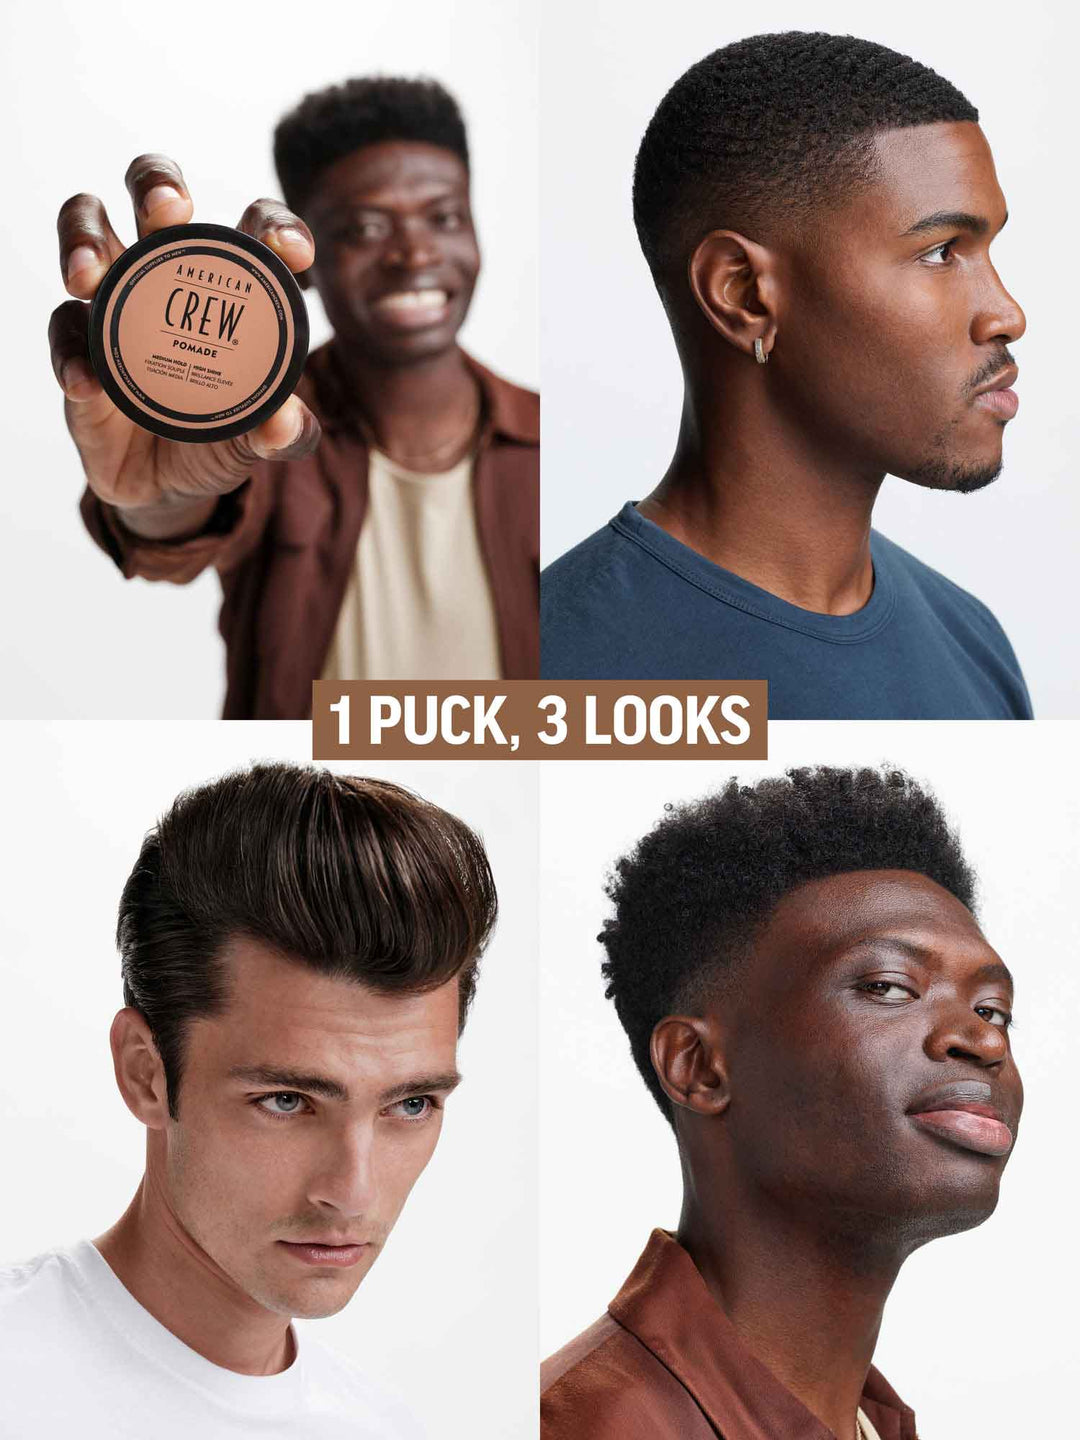 Pomade styling puck on models. 1 puck, 3 looks.